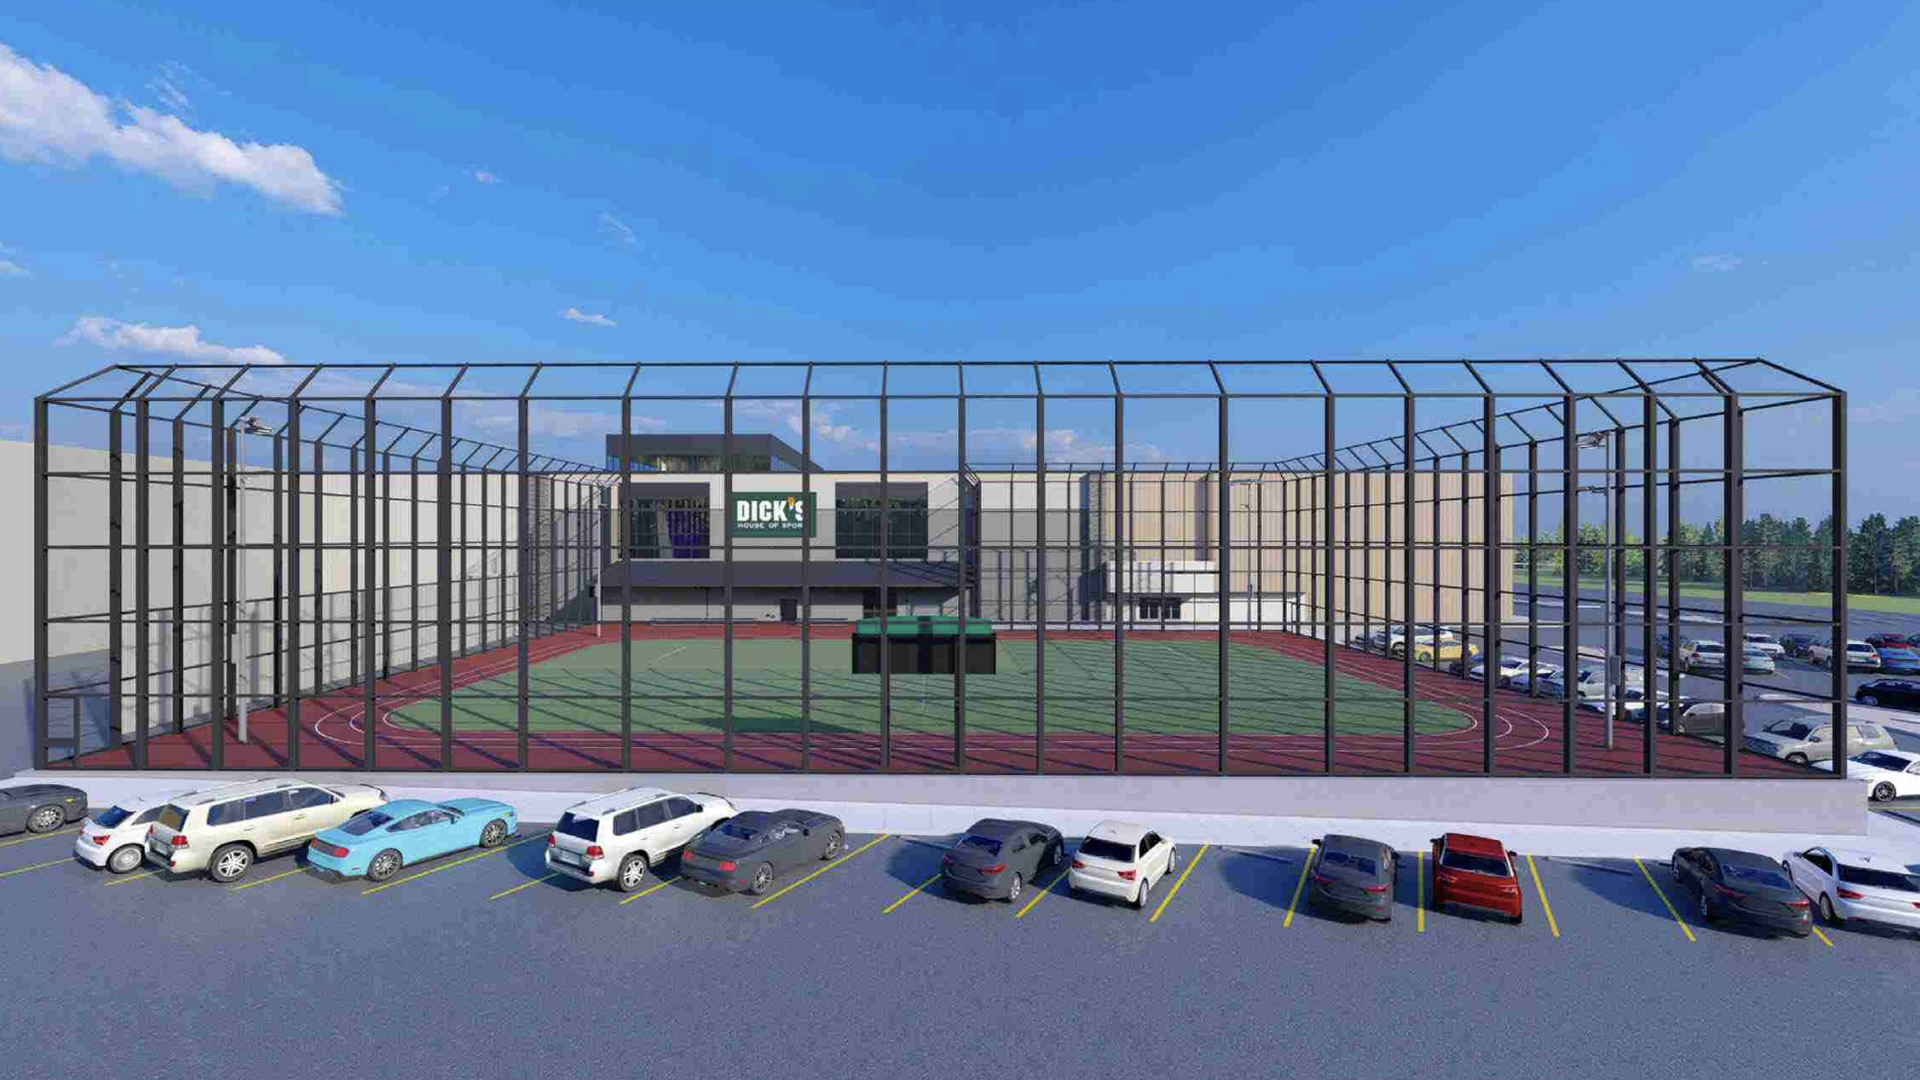 A rendering of the athletic field Dick's wants to build in Minnetonka.